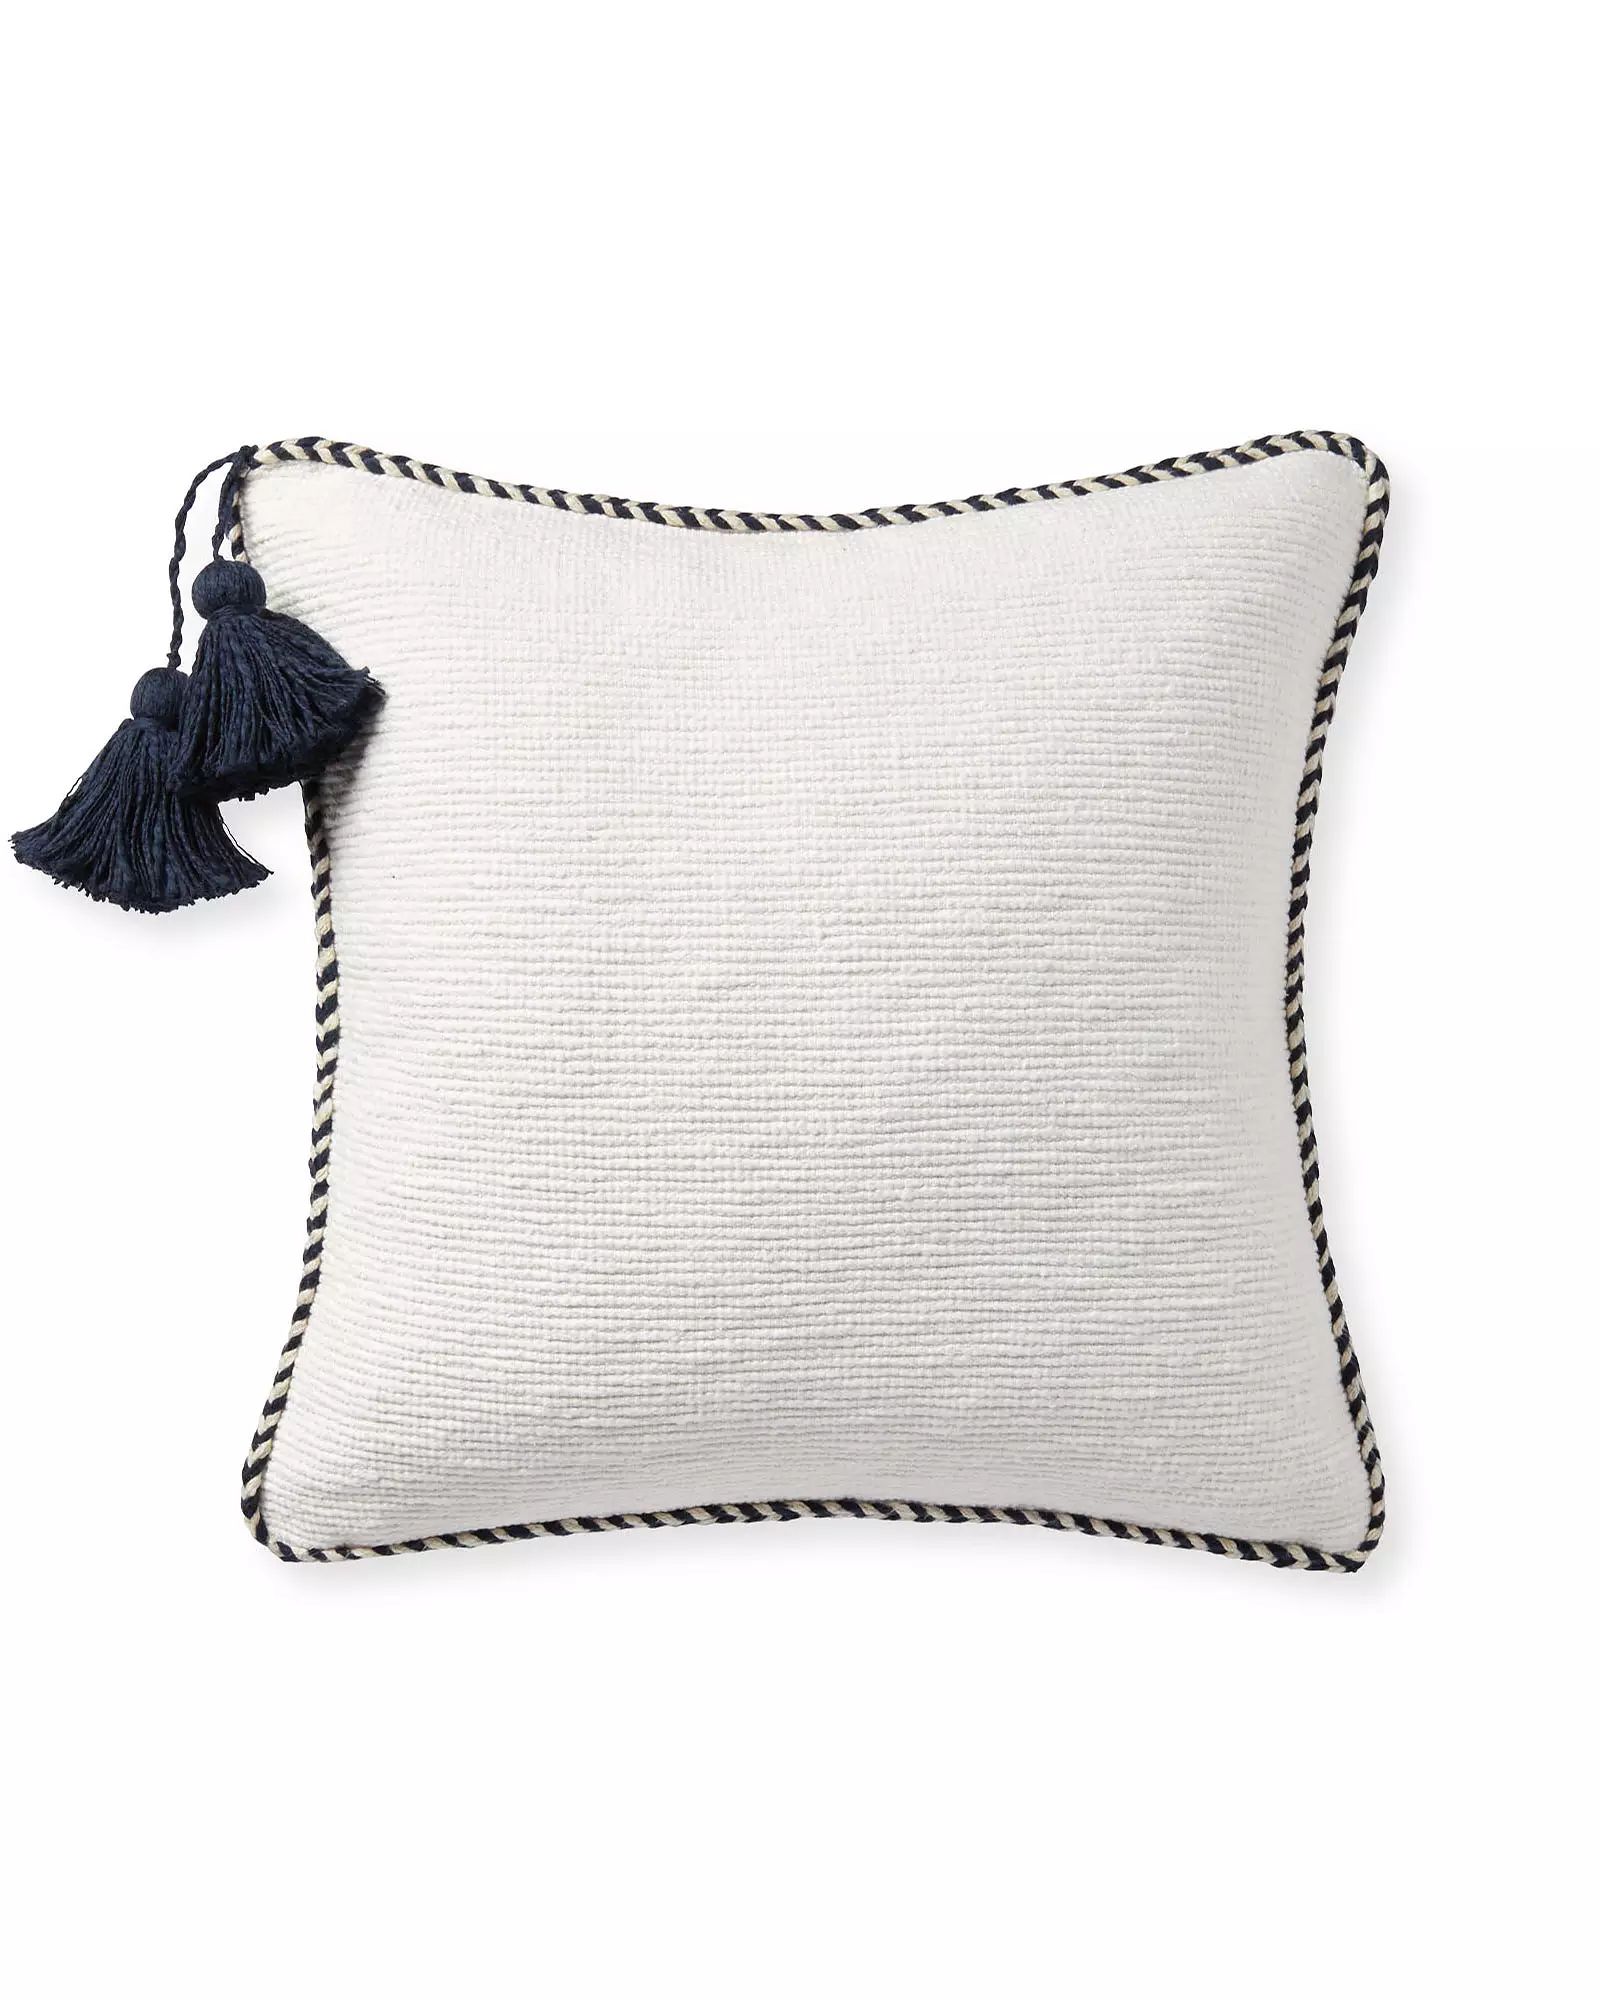 Ridgeline Pillow Cover | Serena and Lily